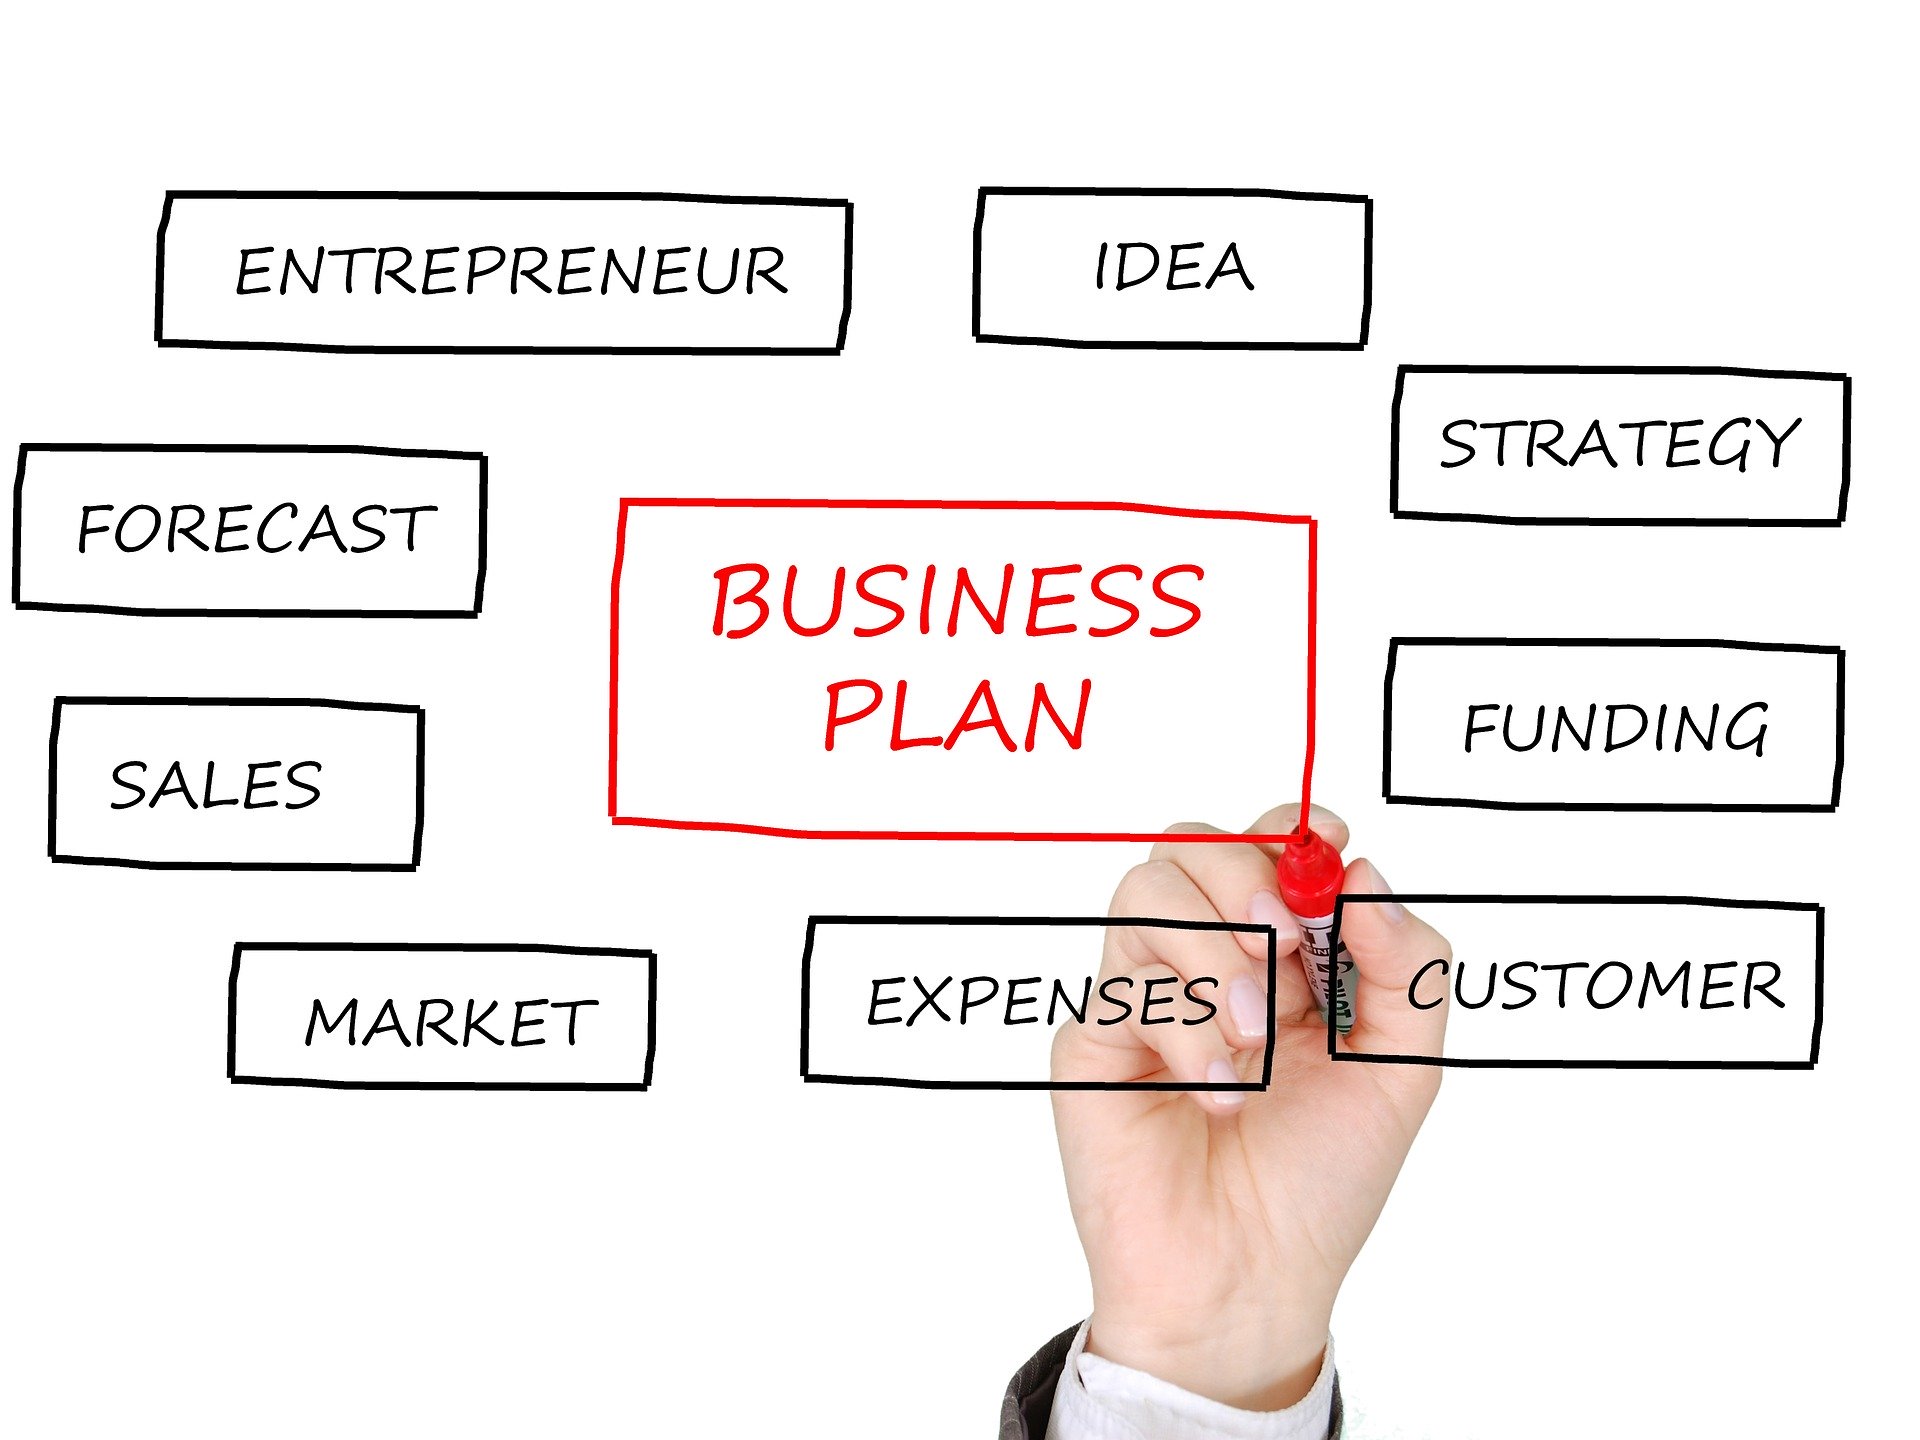 three requirements that a business plan must meet